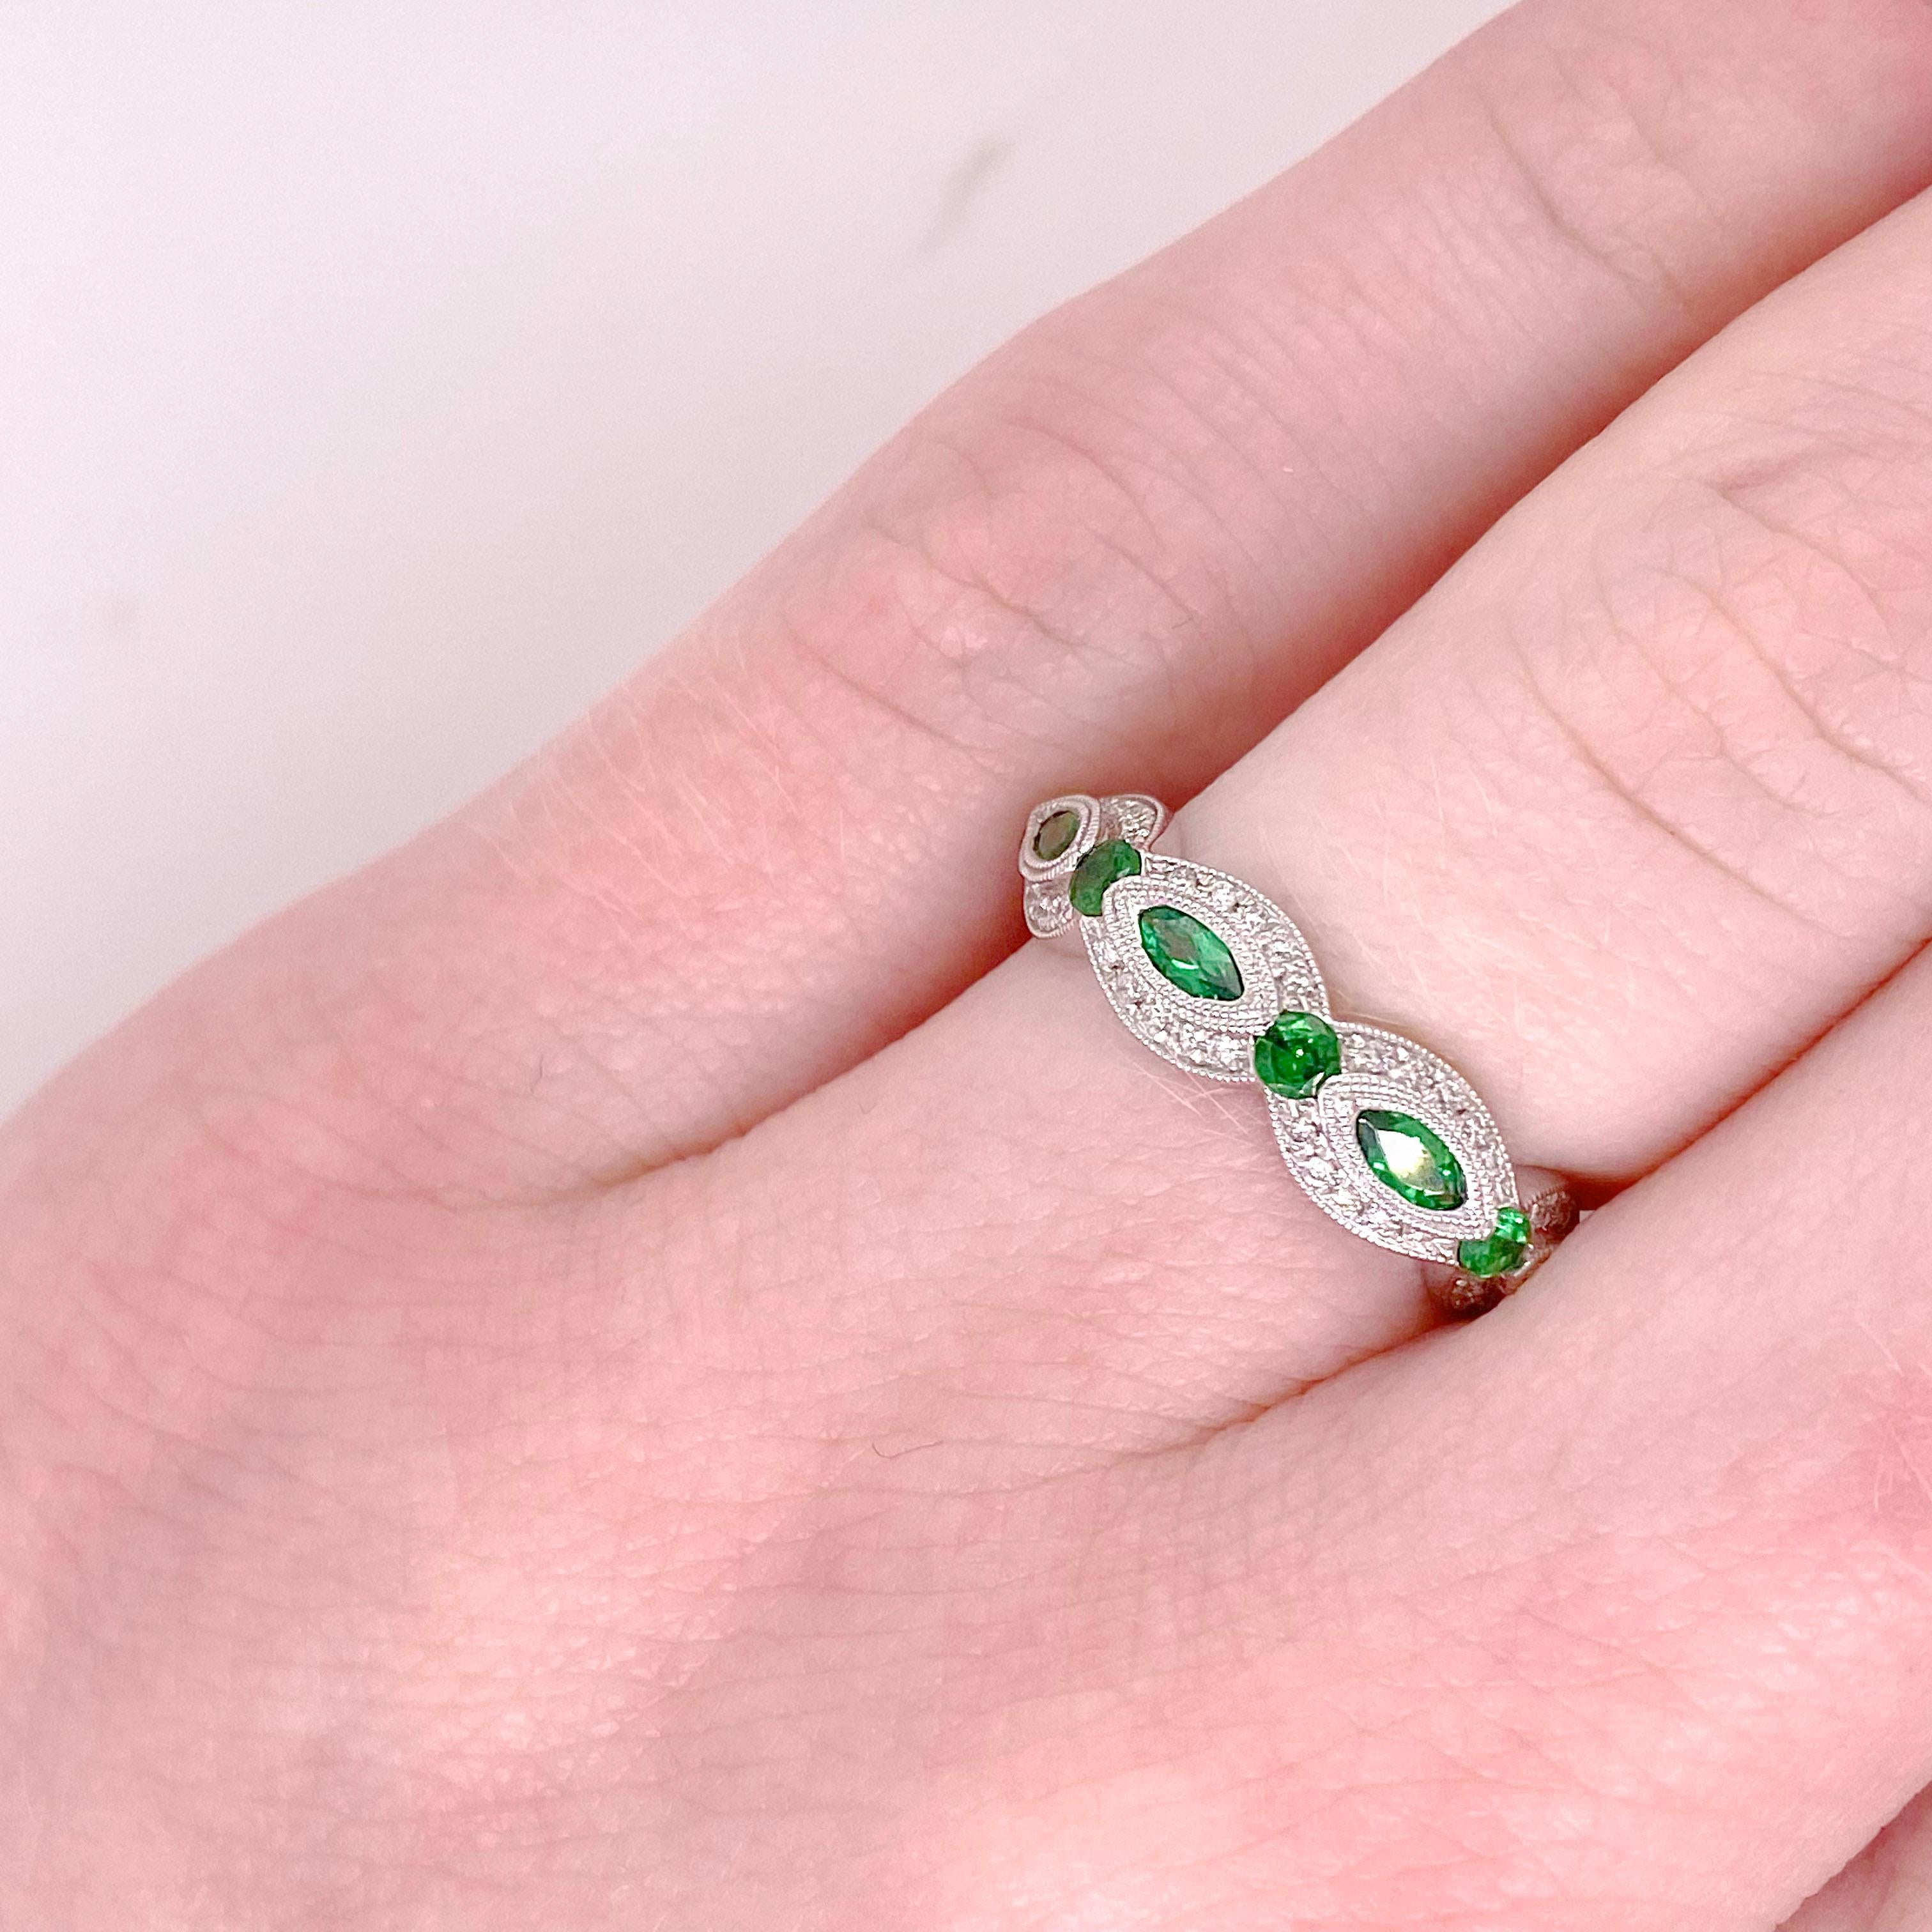 Authentic tsavorite gemstones and natural diamonds embellish this gorgeous band. The band is perfect as an anniversary band, a wedding band or a stackable band. Most people look at these amazing green gemstones and think that they are emeralds but